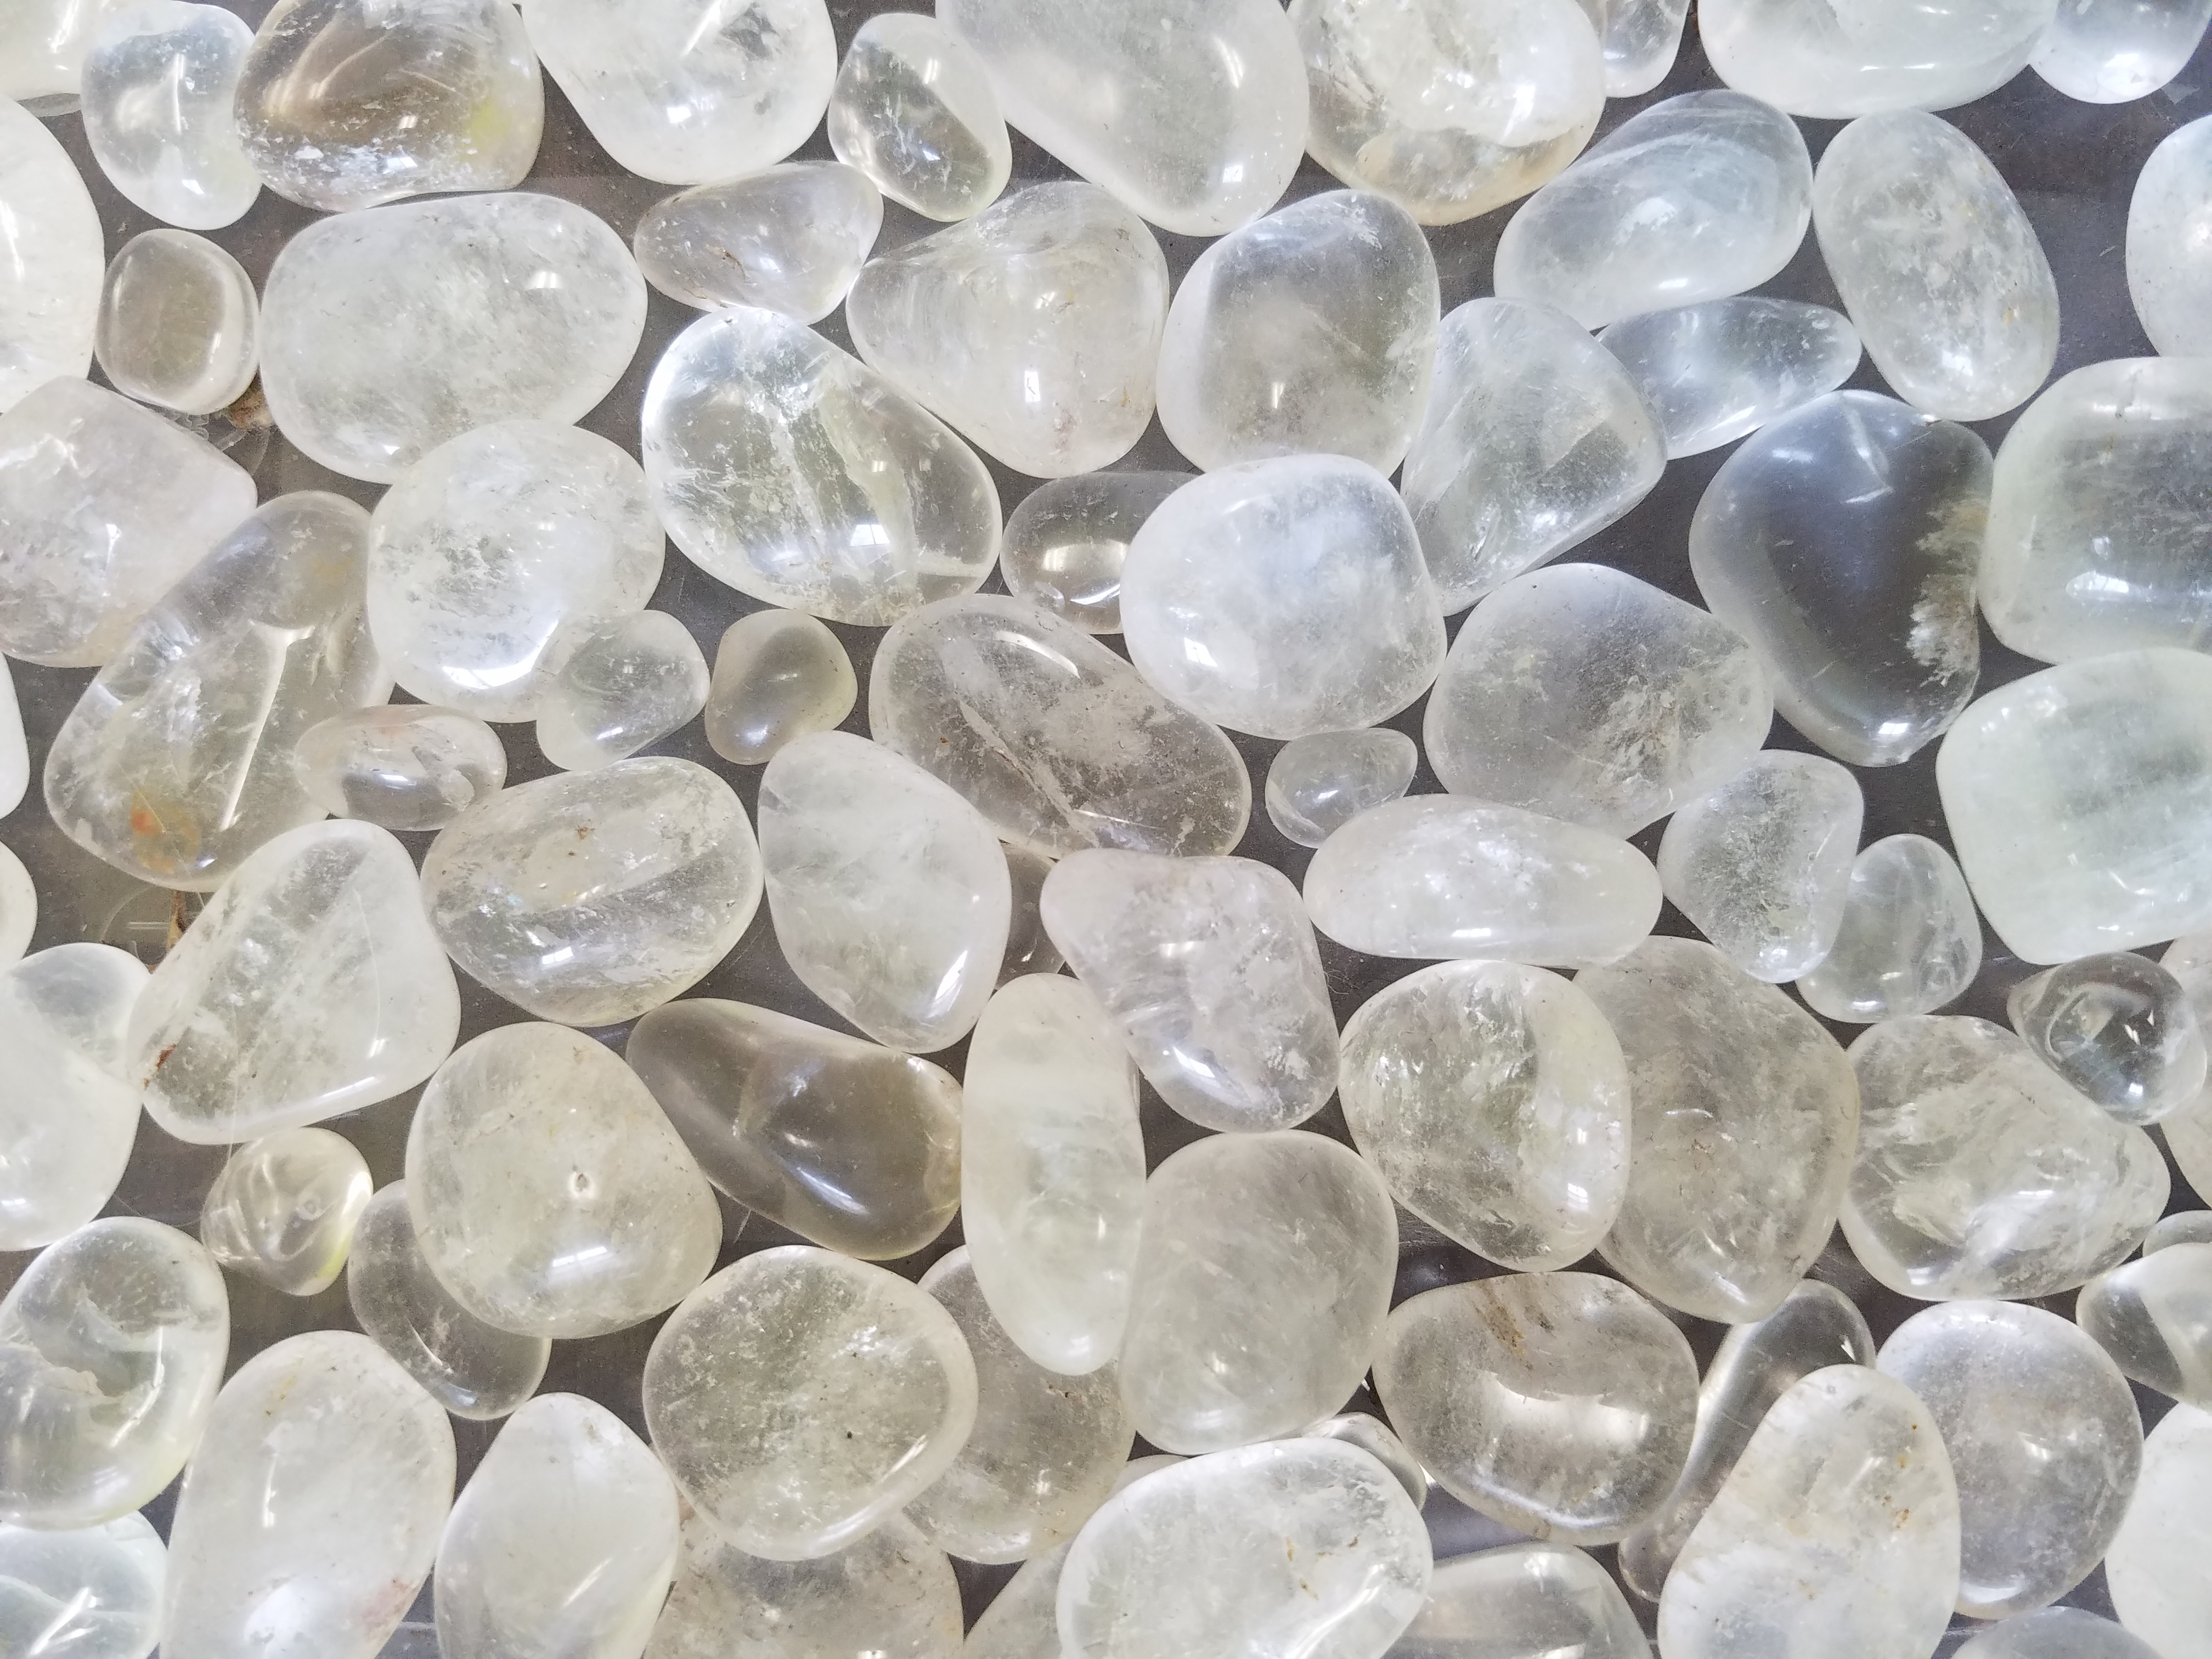 Clear White Stones 1668 - Crystal - HD Wallpaper 